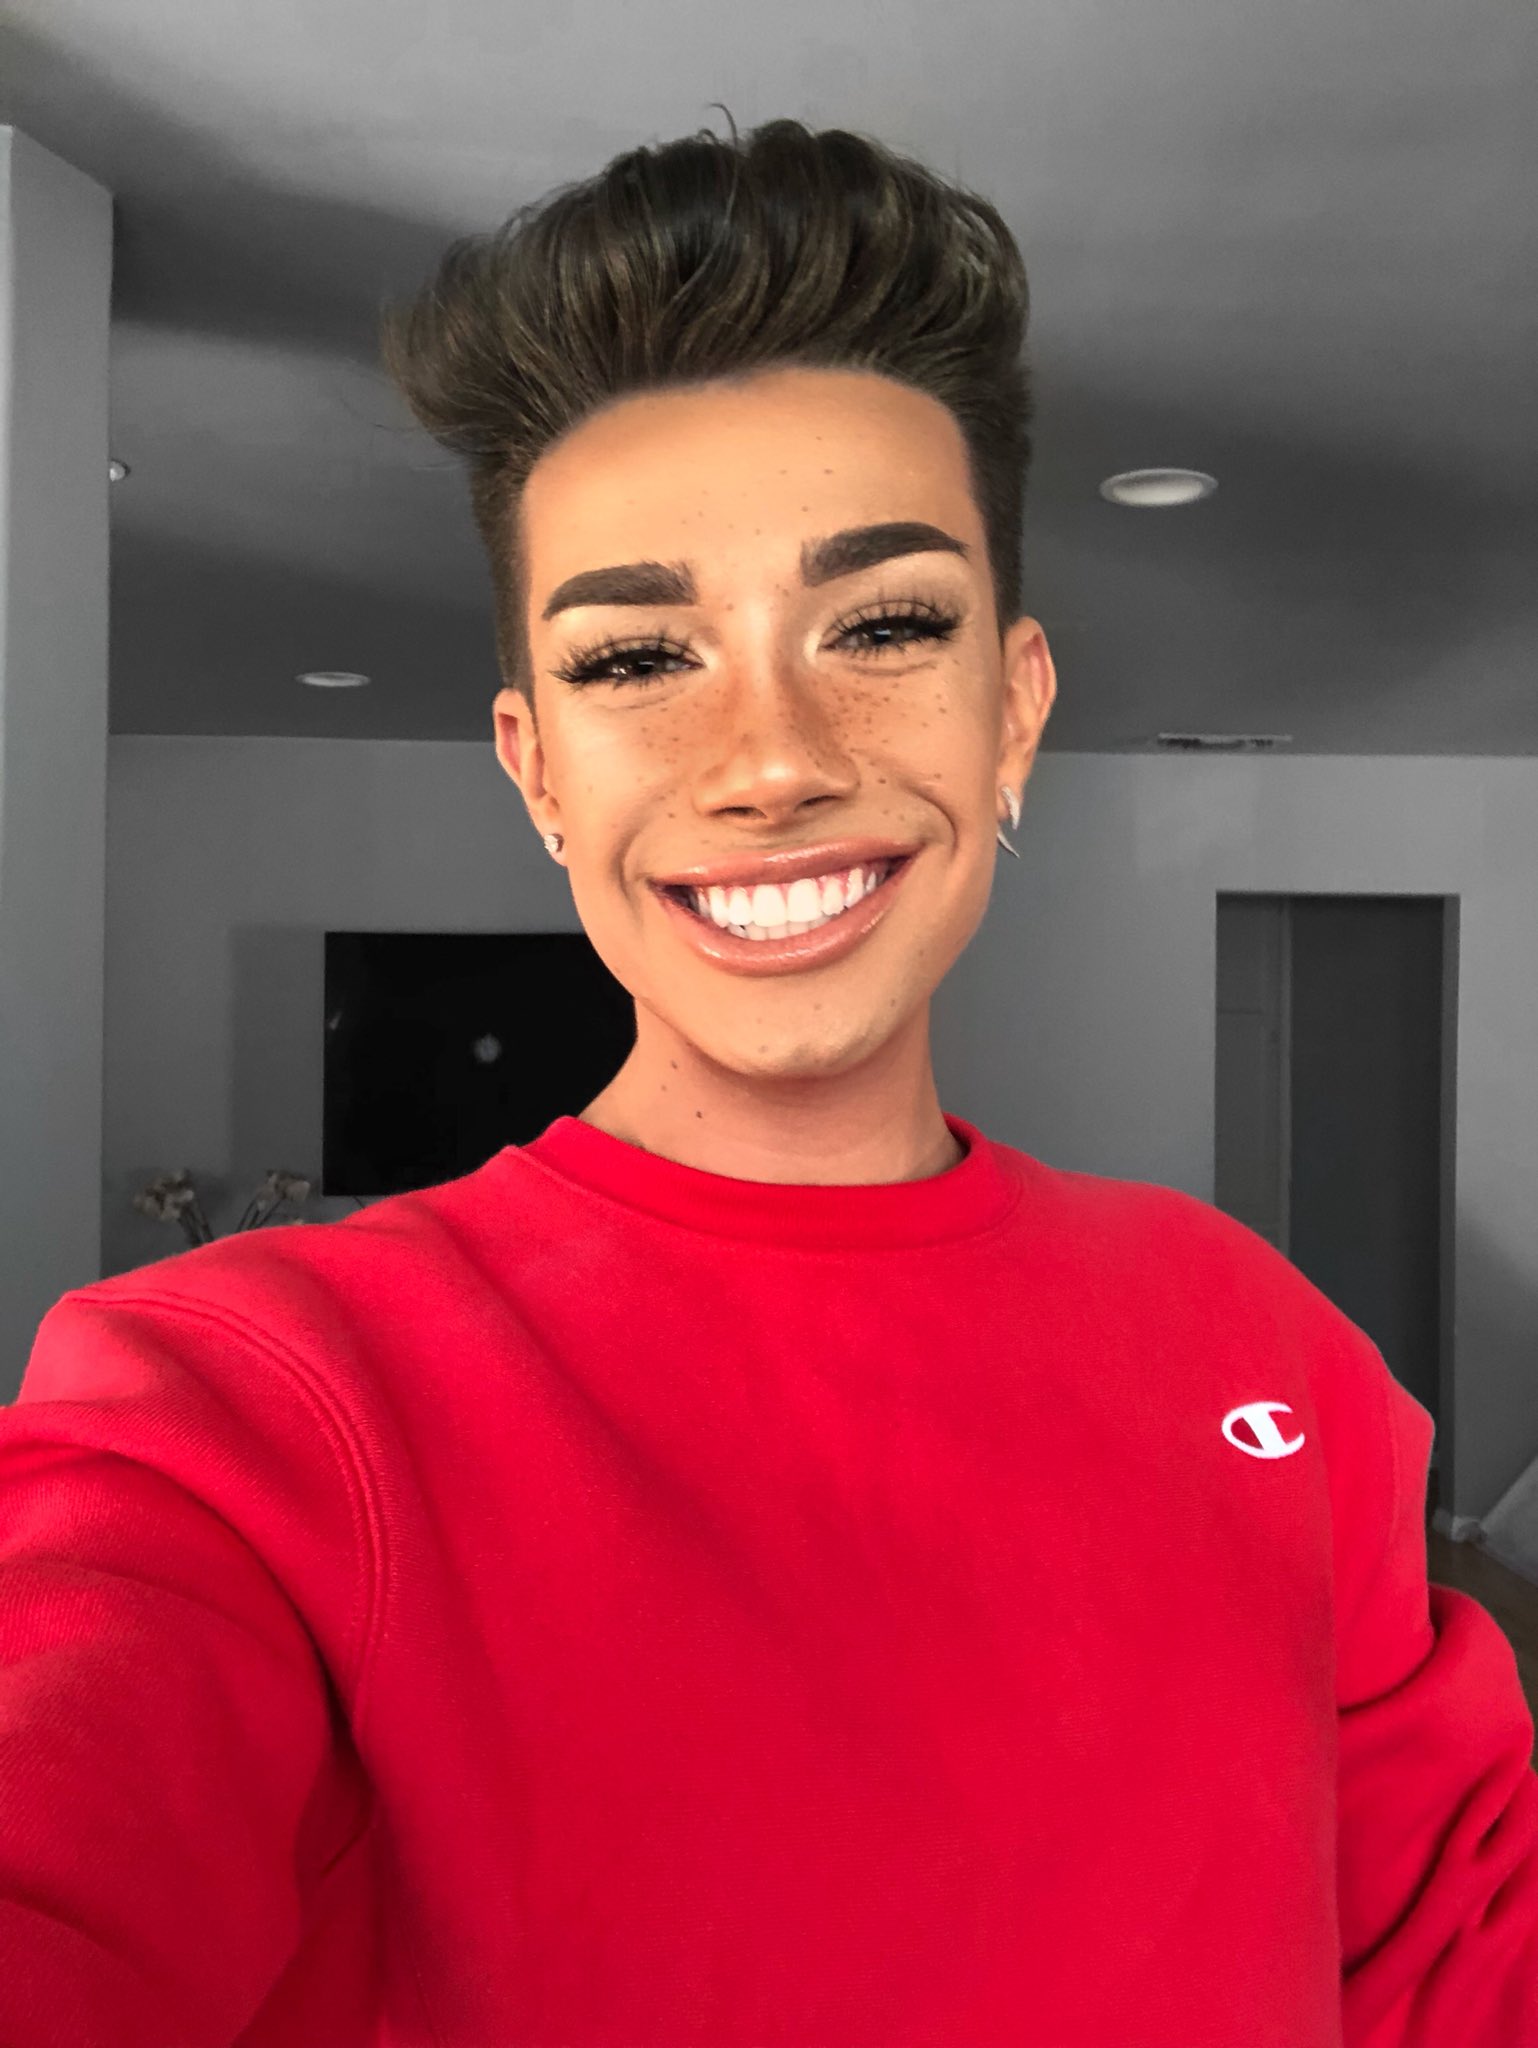 James Charles on Twitter: "happy sunday #sisterselfies. 